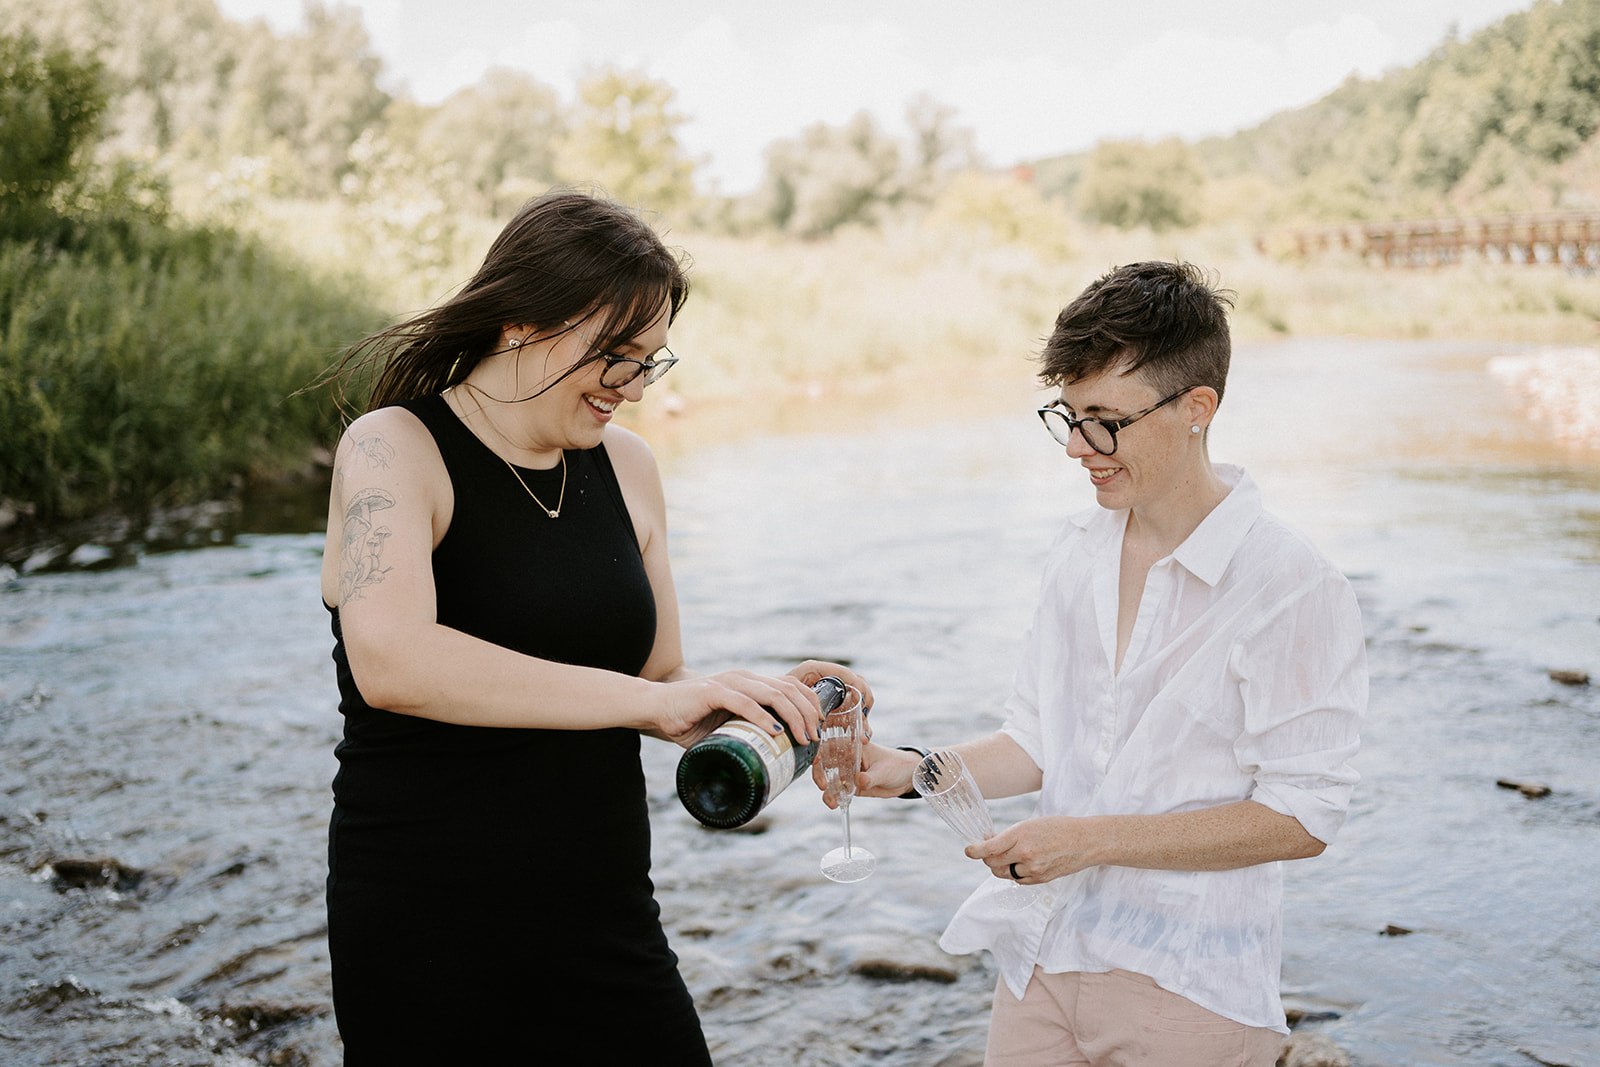 One person pouring champagne into their partners glass while standing in the creek.